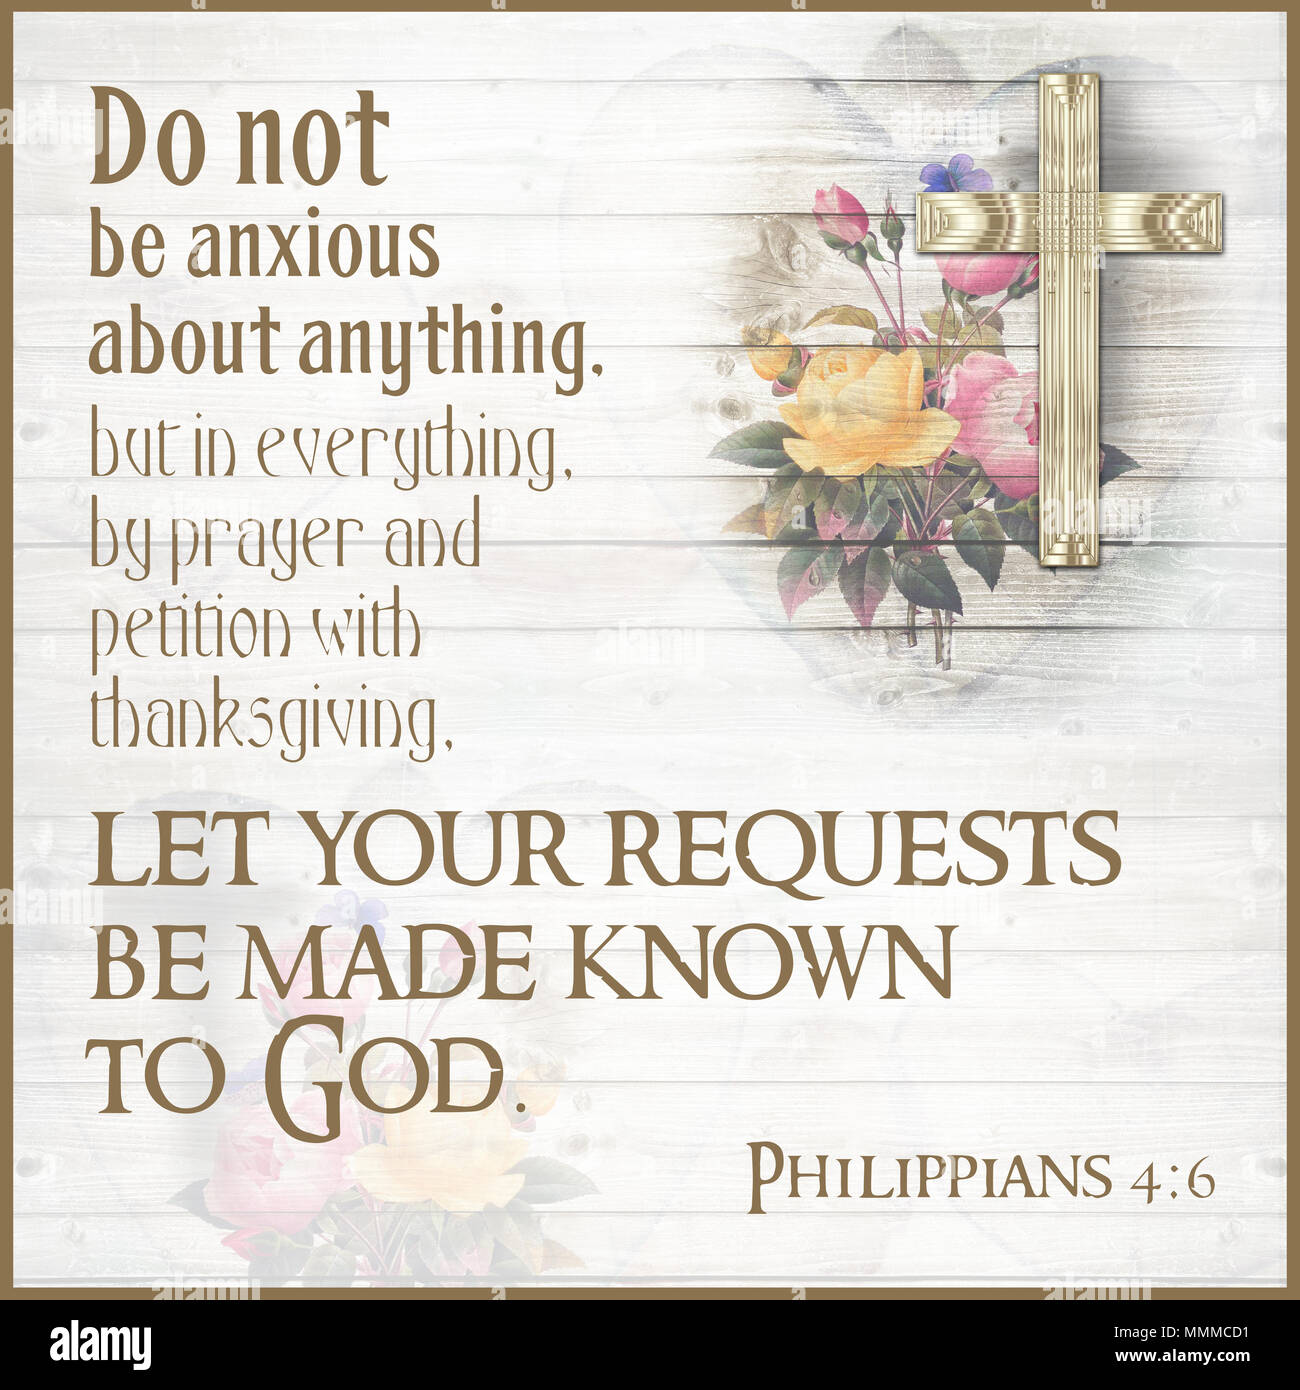 Do not be anxious about anything, but in everything, by prayer and